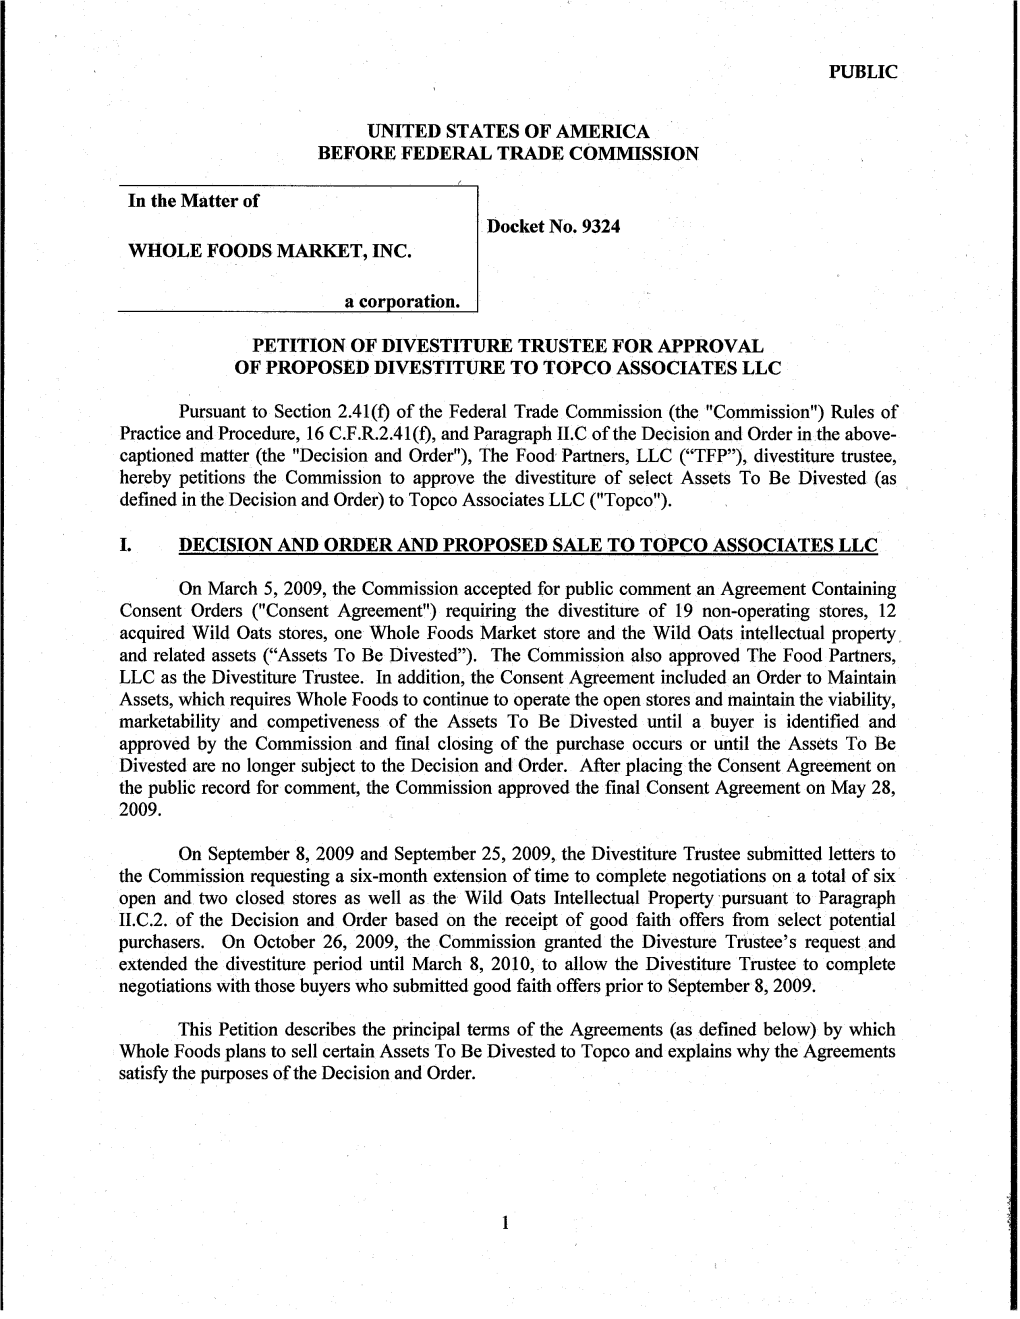 Petition of Divestiture Trustee for Approval of Proposed Divestiture to Topco Associates Llc